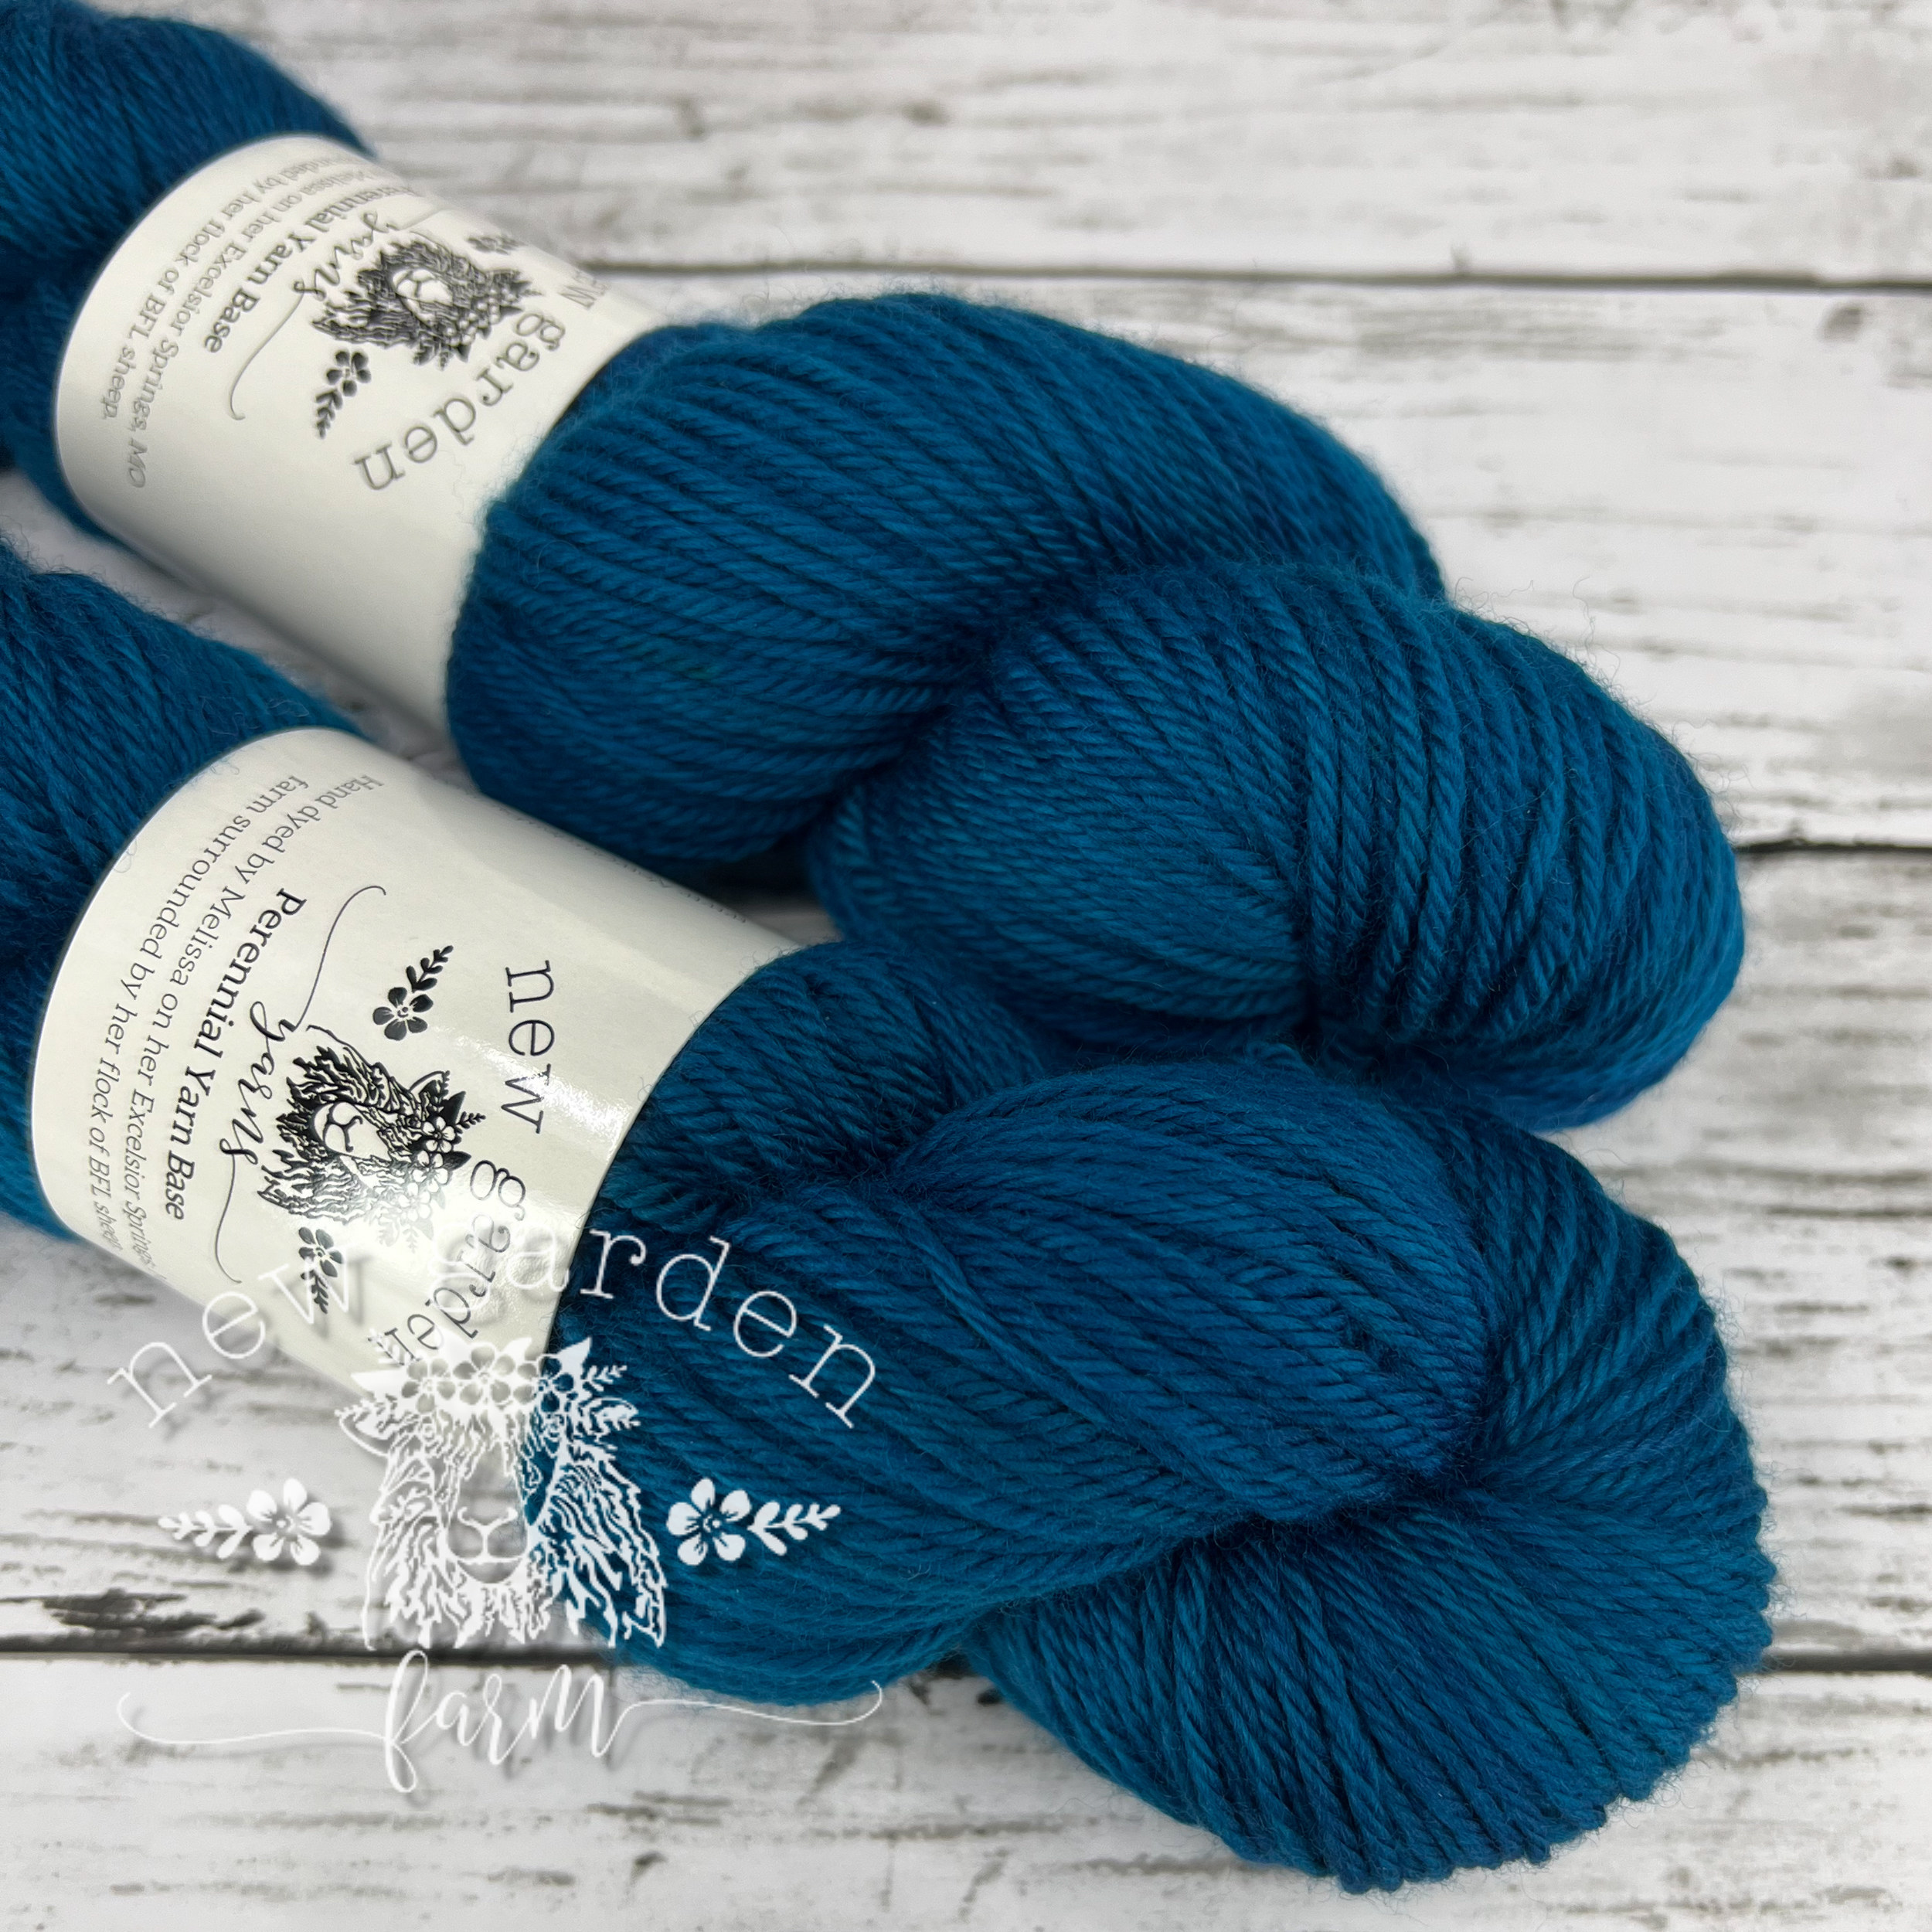 ocean blue worsted weight hand dyed yarn